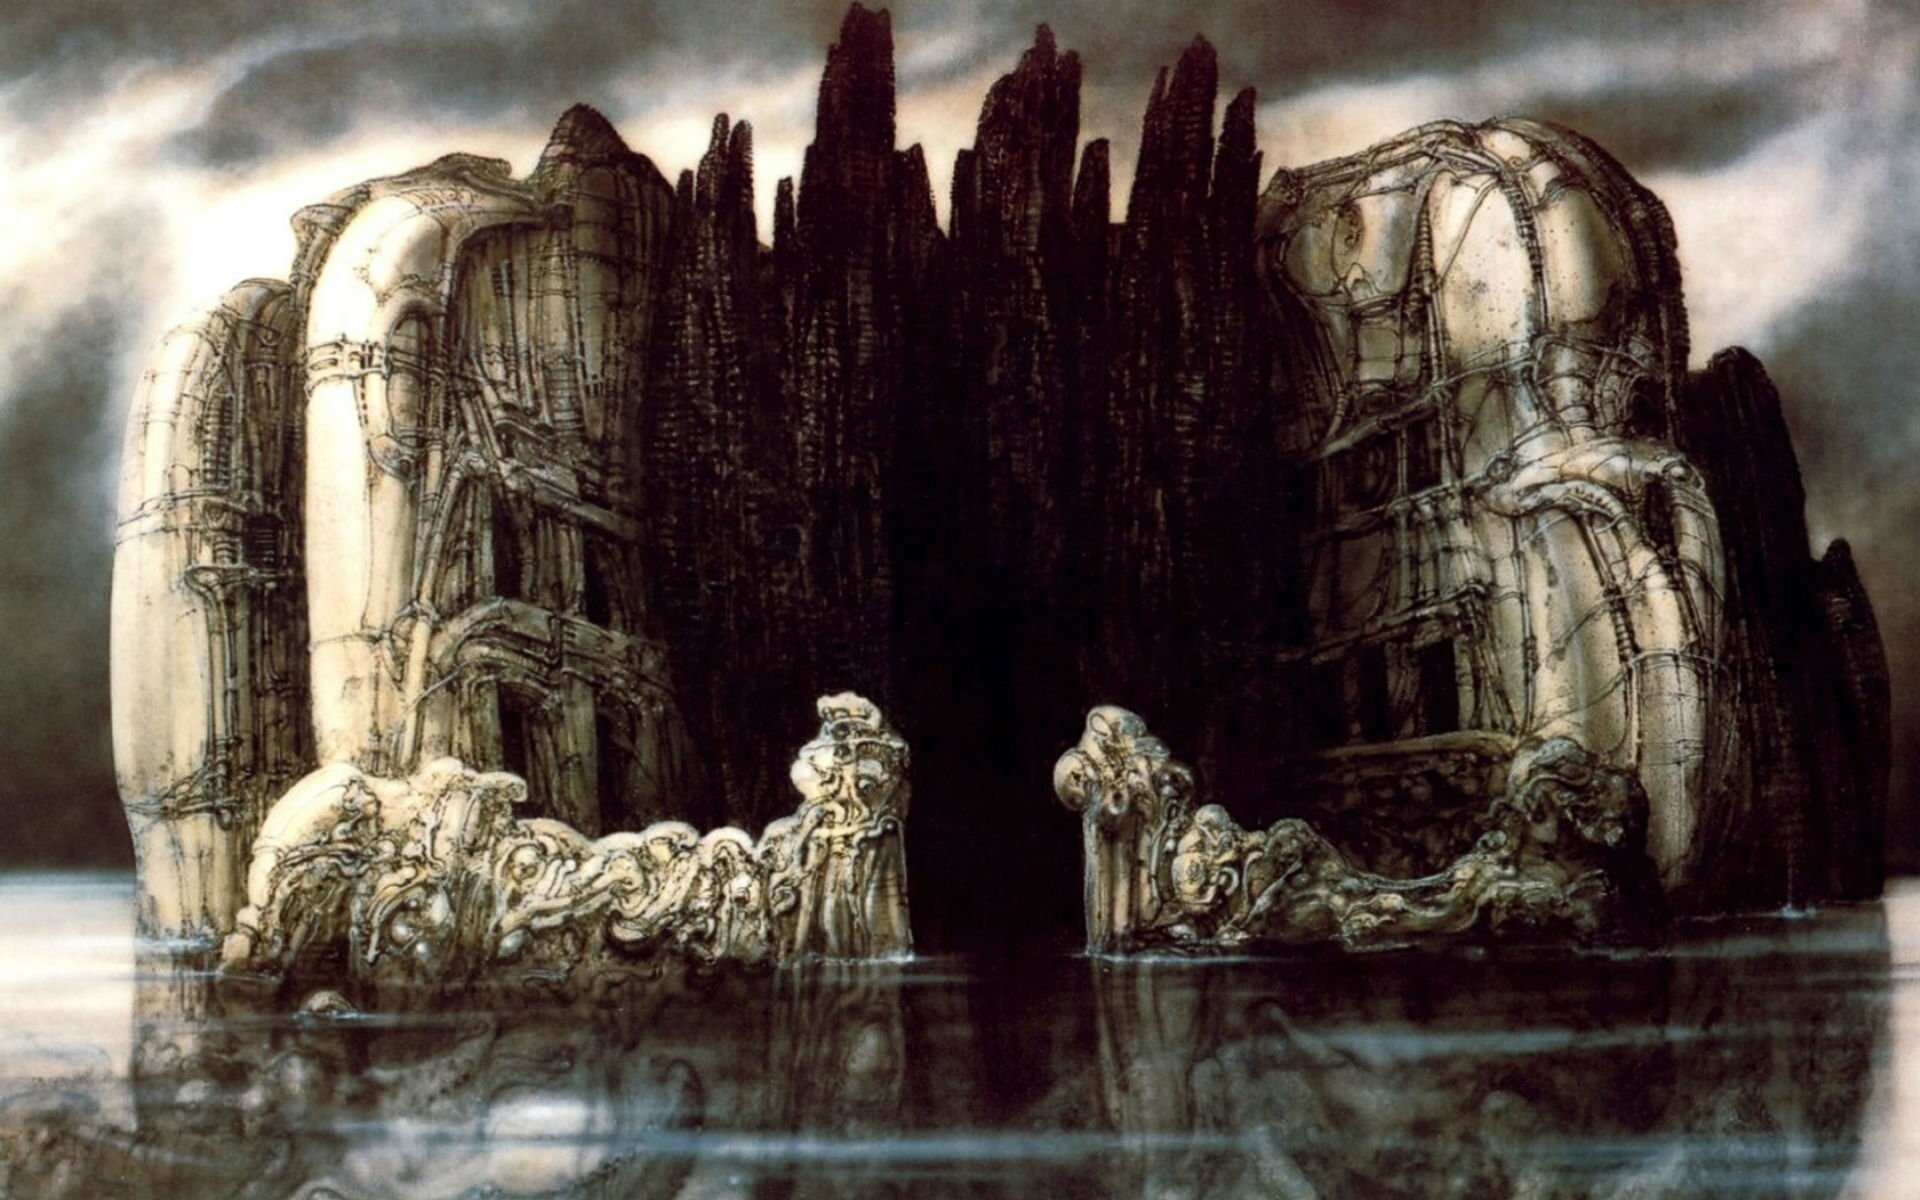 H.R. Giger: Biomech Castle, A Reference To Greek Mythology, The Strait Between Scylla And Charybdis. 1920x1200 HD Wallpaper.